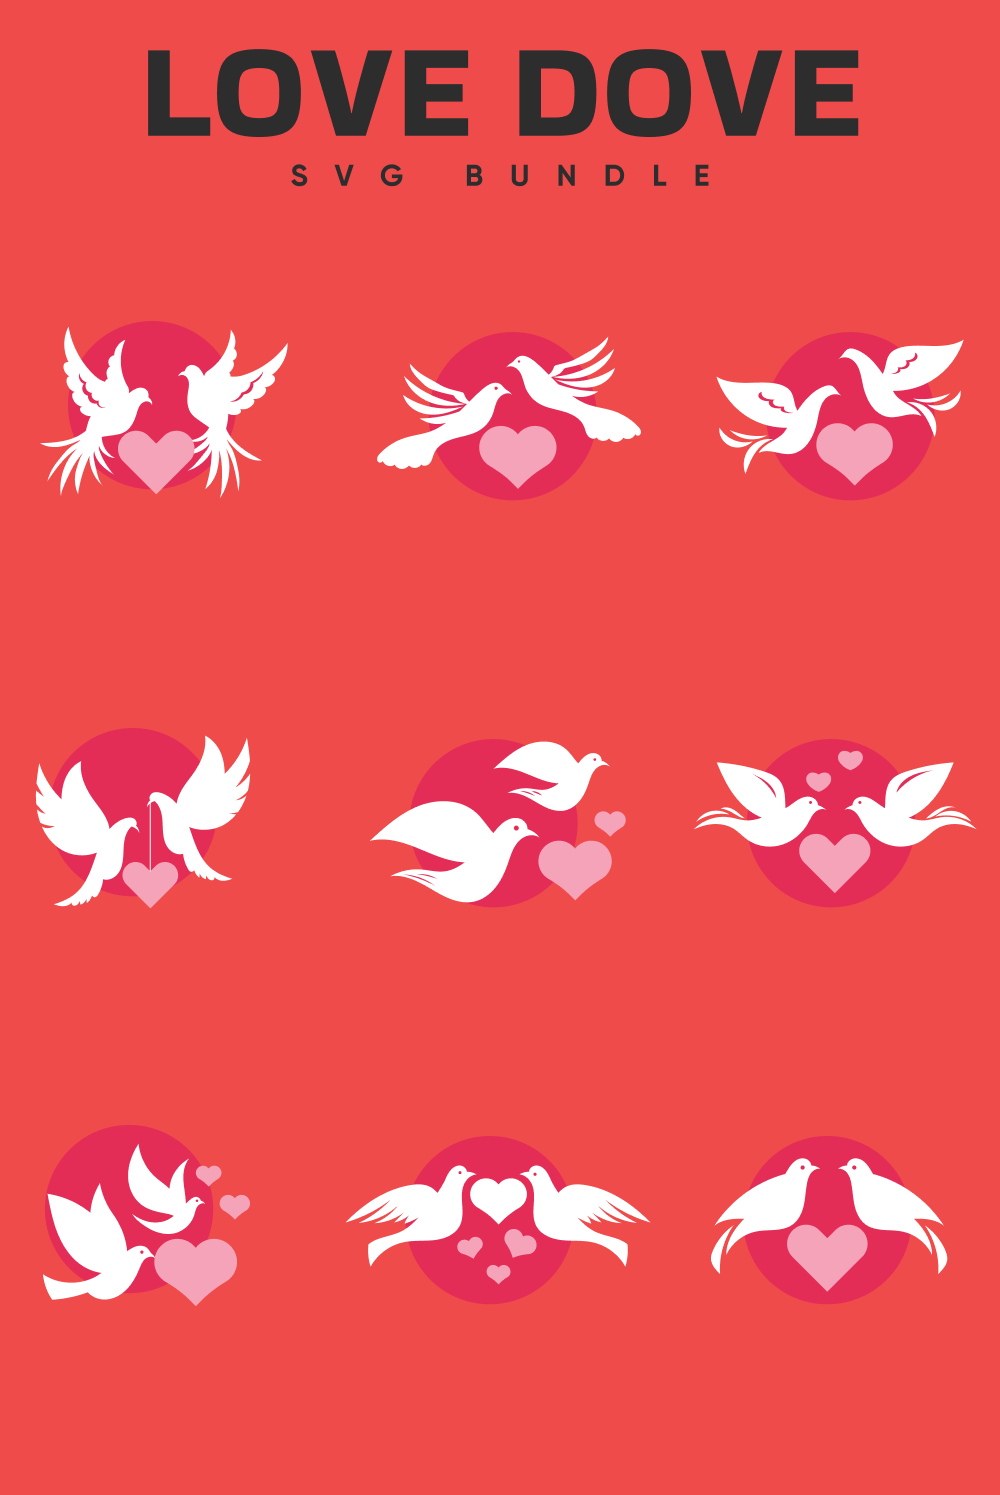 Red background with white doves and hearts.